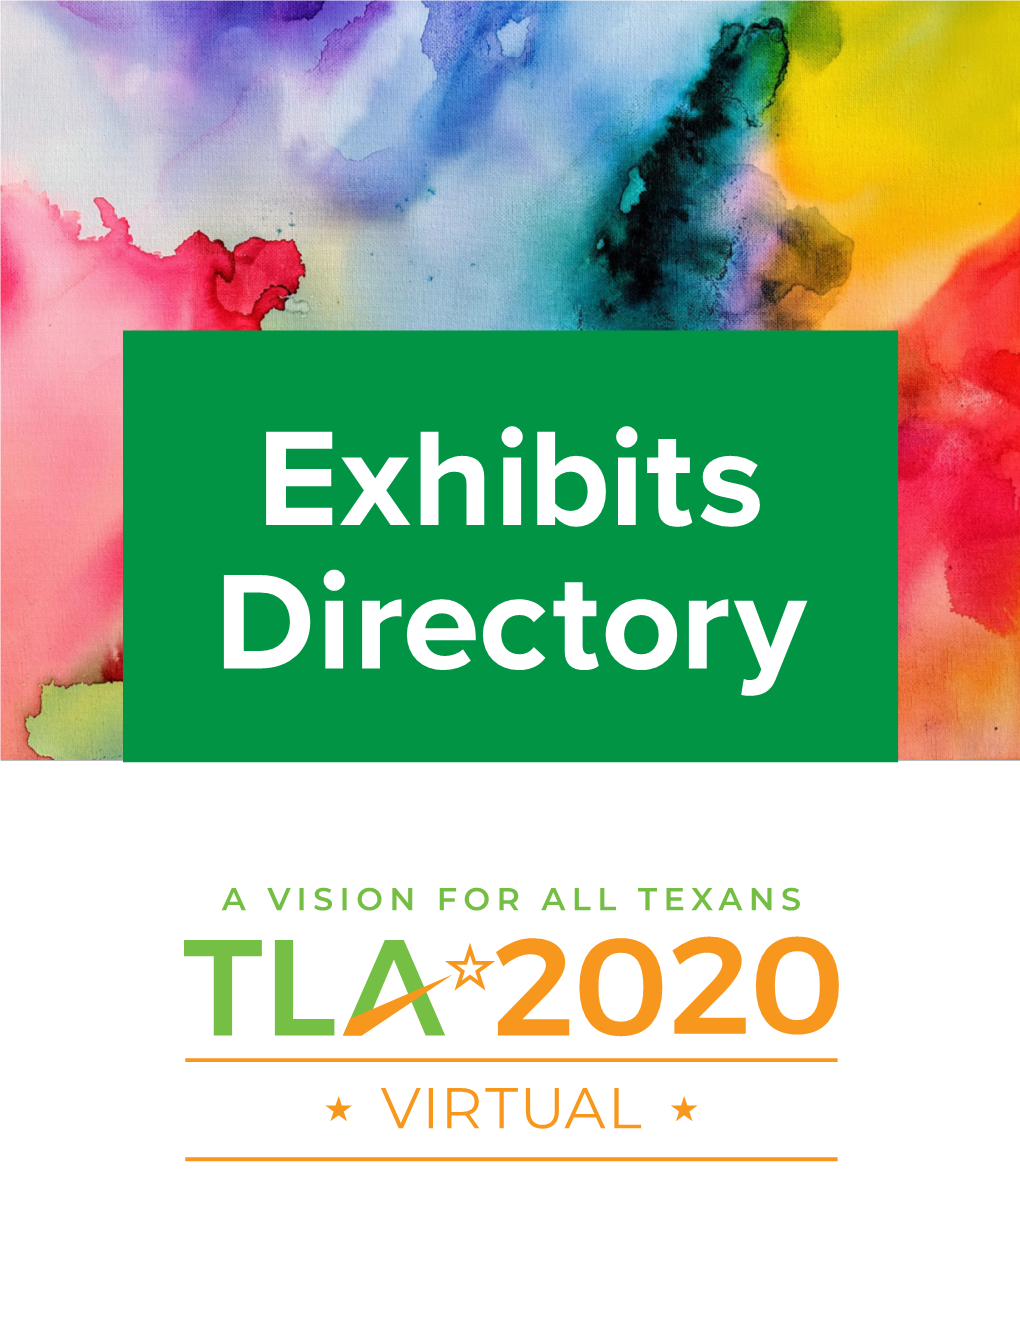 VIRTUAL Exhibiting Companies As of March 9, 2020